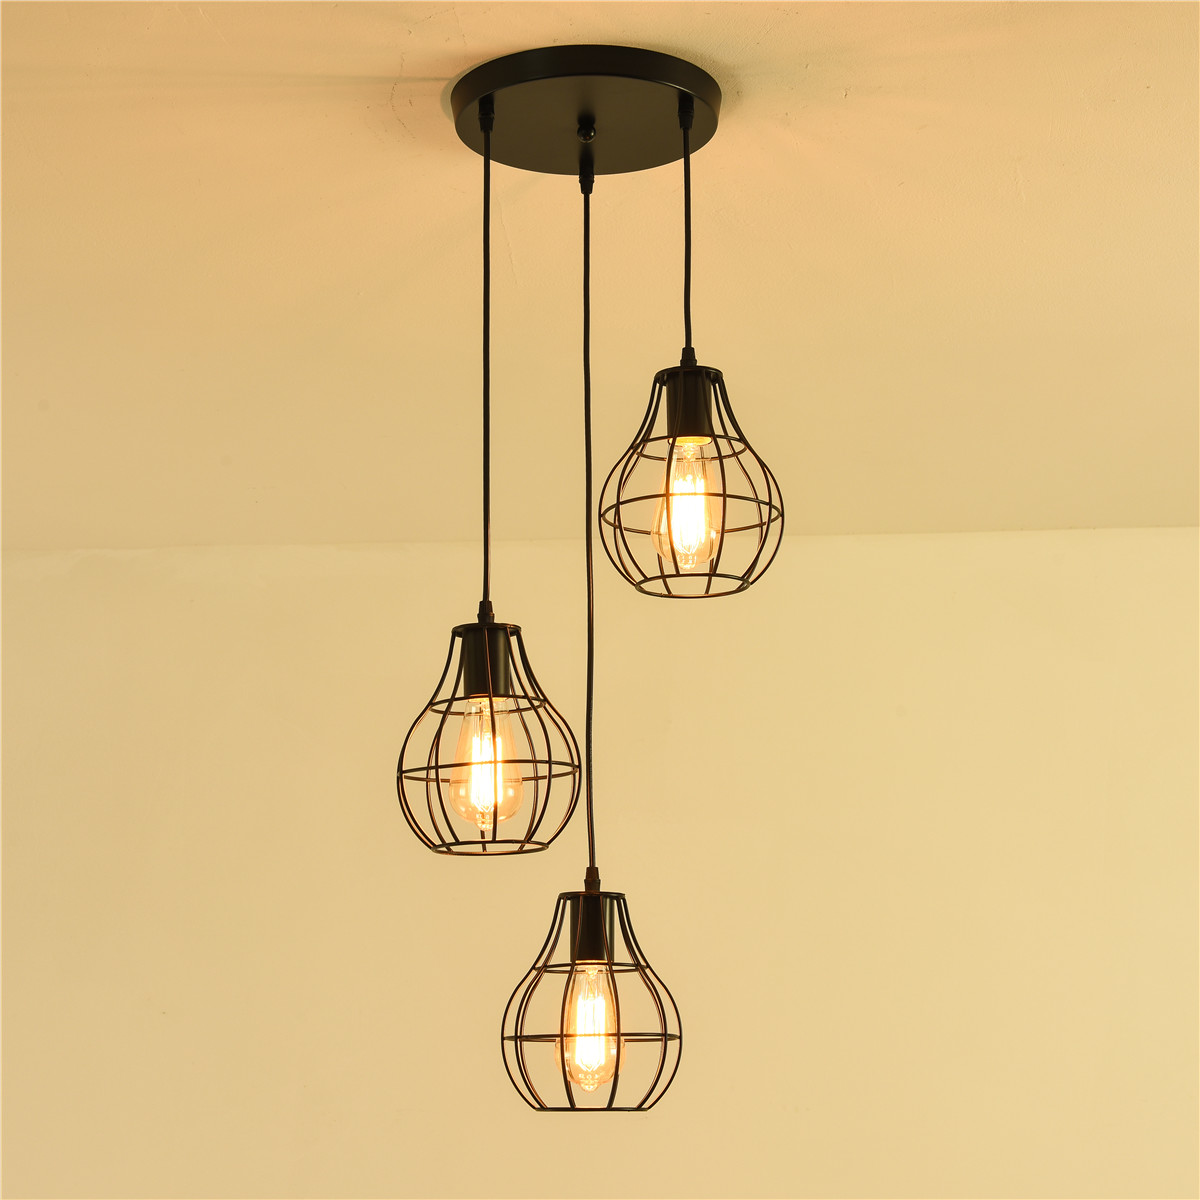 3-Lights-Industrial-Pendant-Lighting-Ceiling-Metal-Vintage-Hanging-Retro-Lamp-Without-Bulb-1710143-4